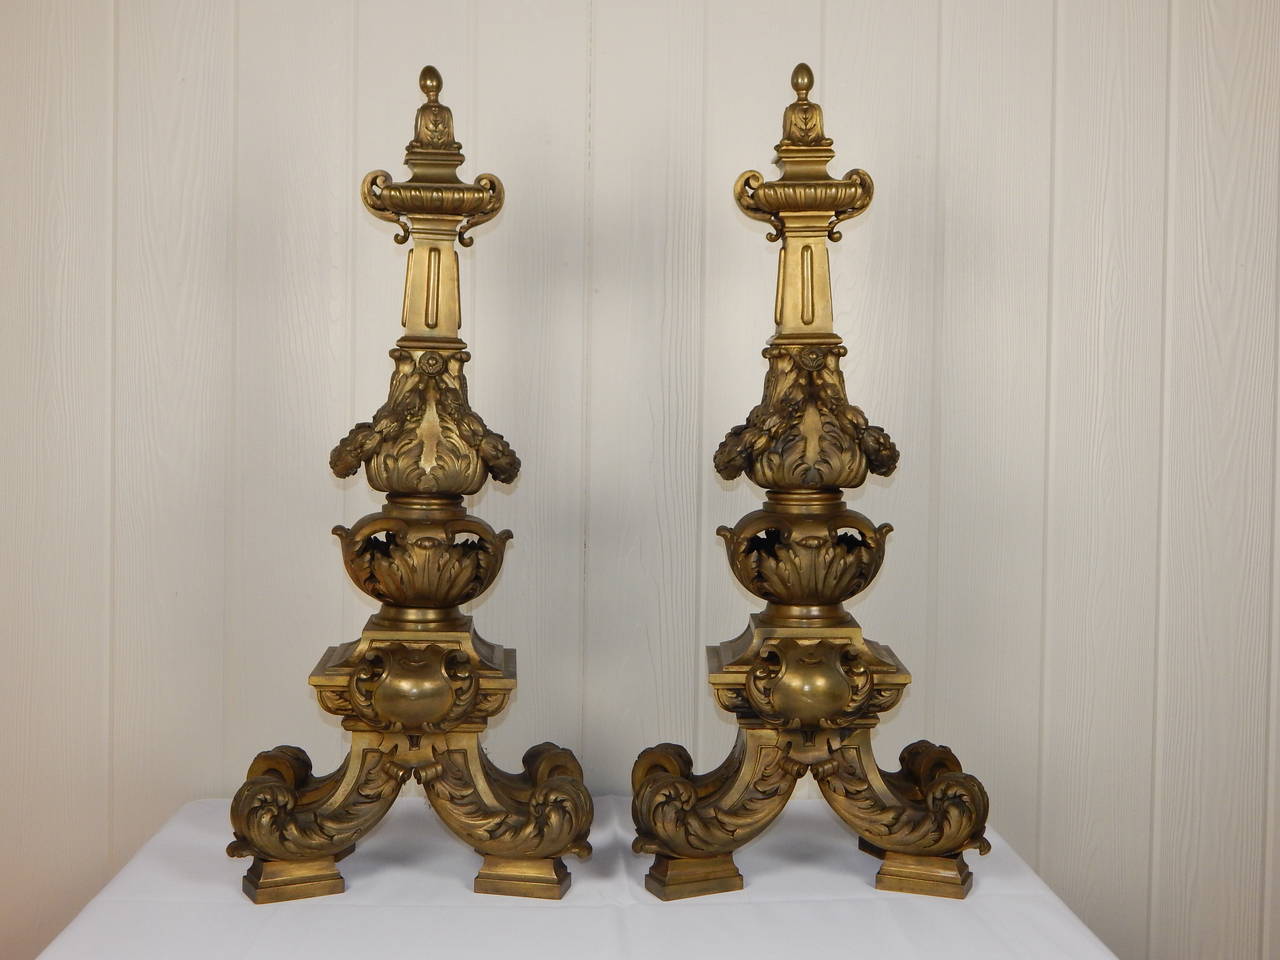 Extremely fine pair of large bronze chenets in the style of Louis XVI. Both chenets are stamped "MADE IN FRANCE and Lescurieux, PARIS.
The quality and detail of the casting on these is truly exceptional.